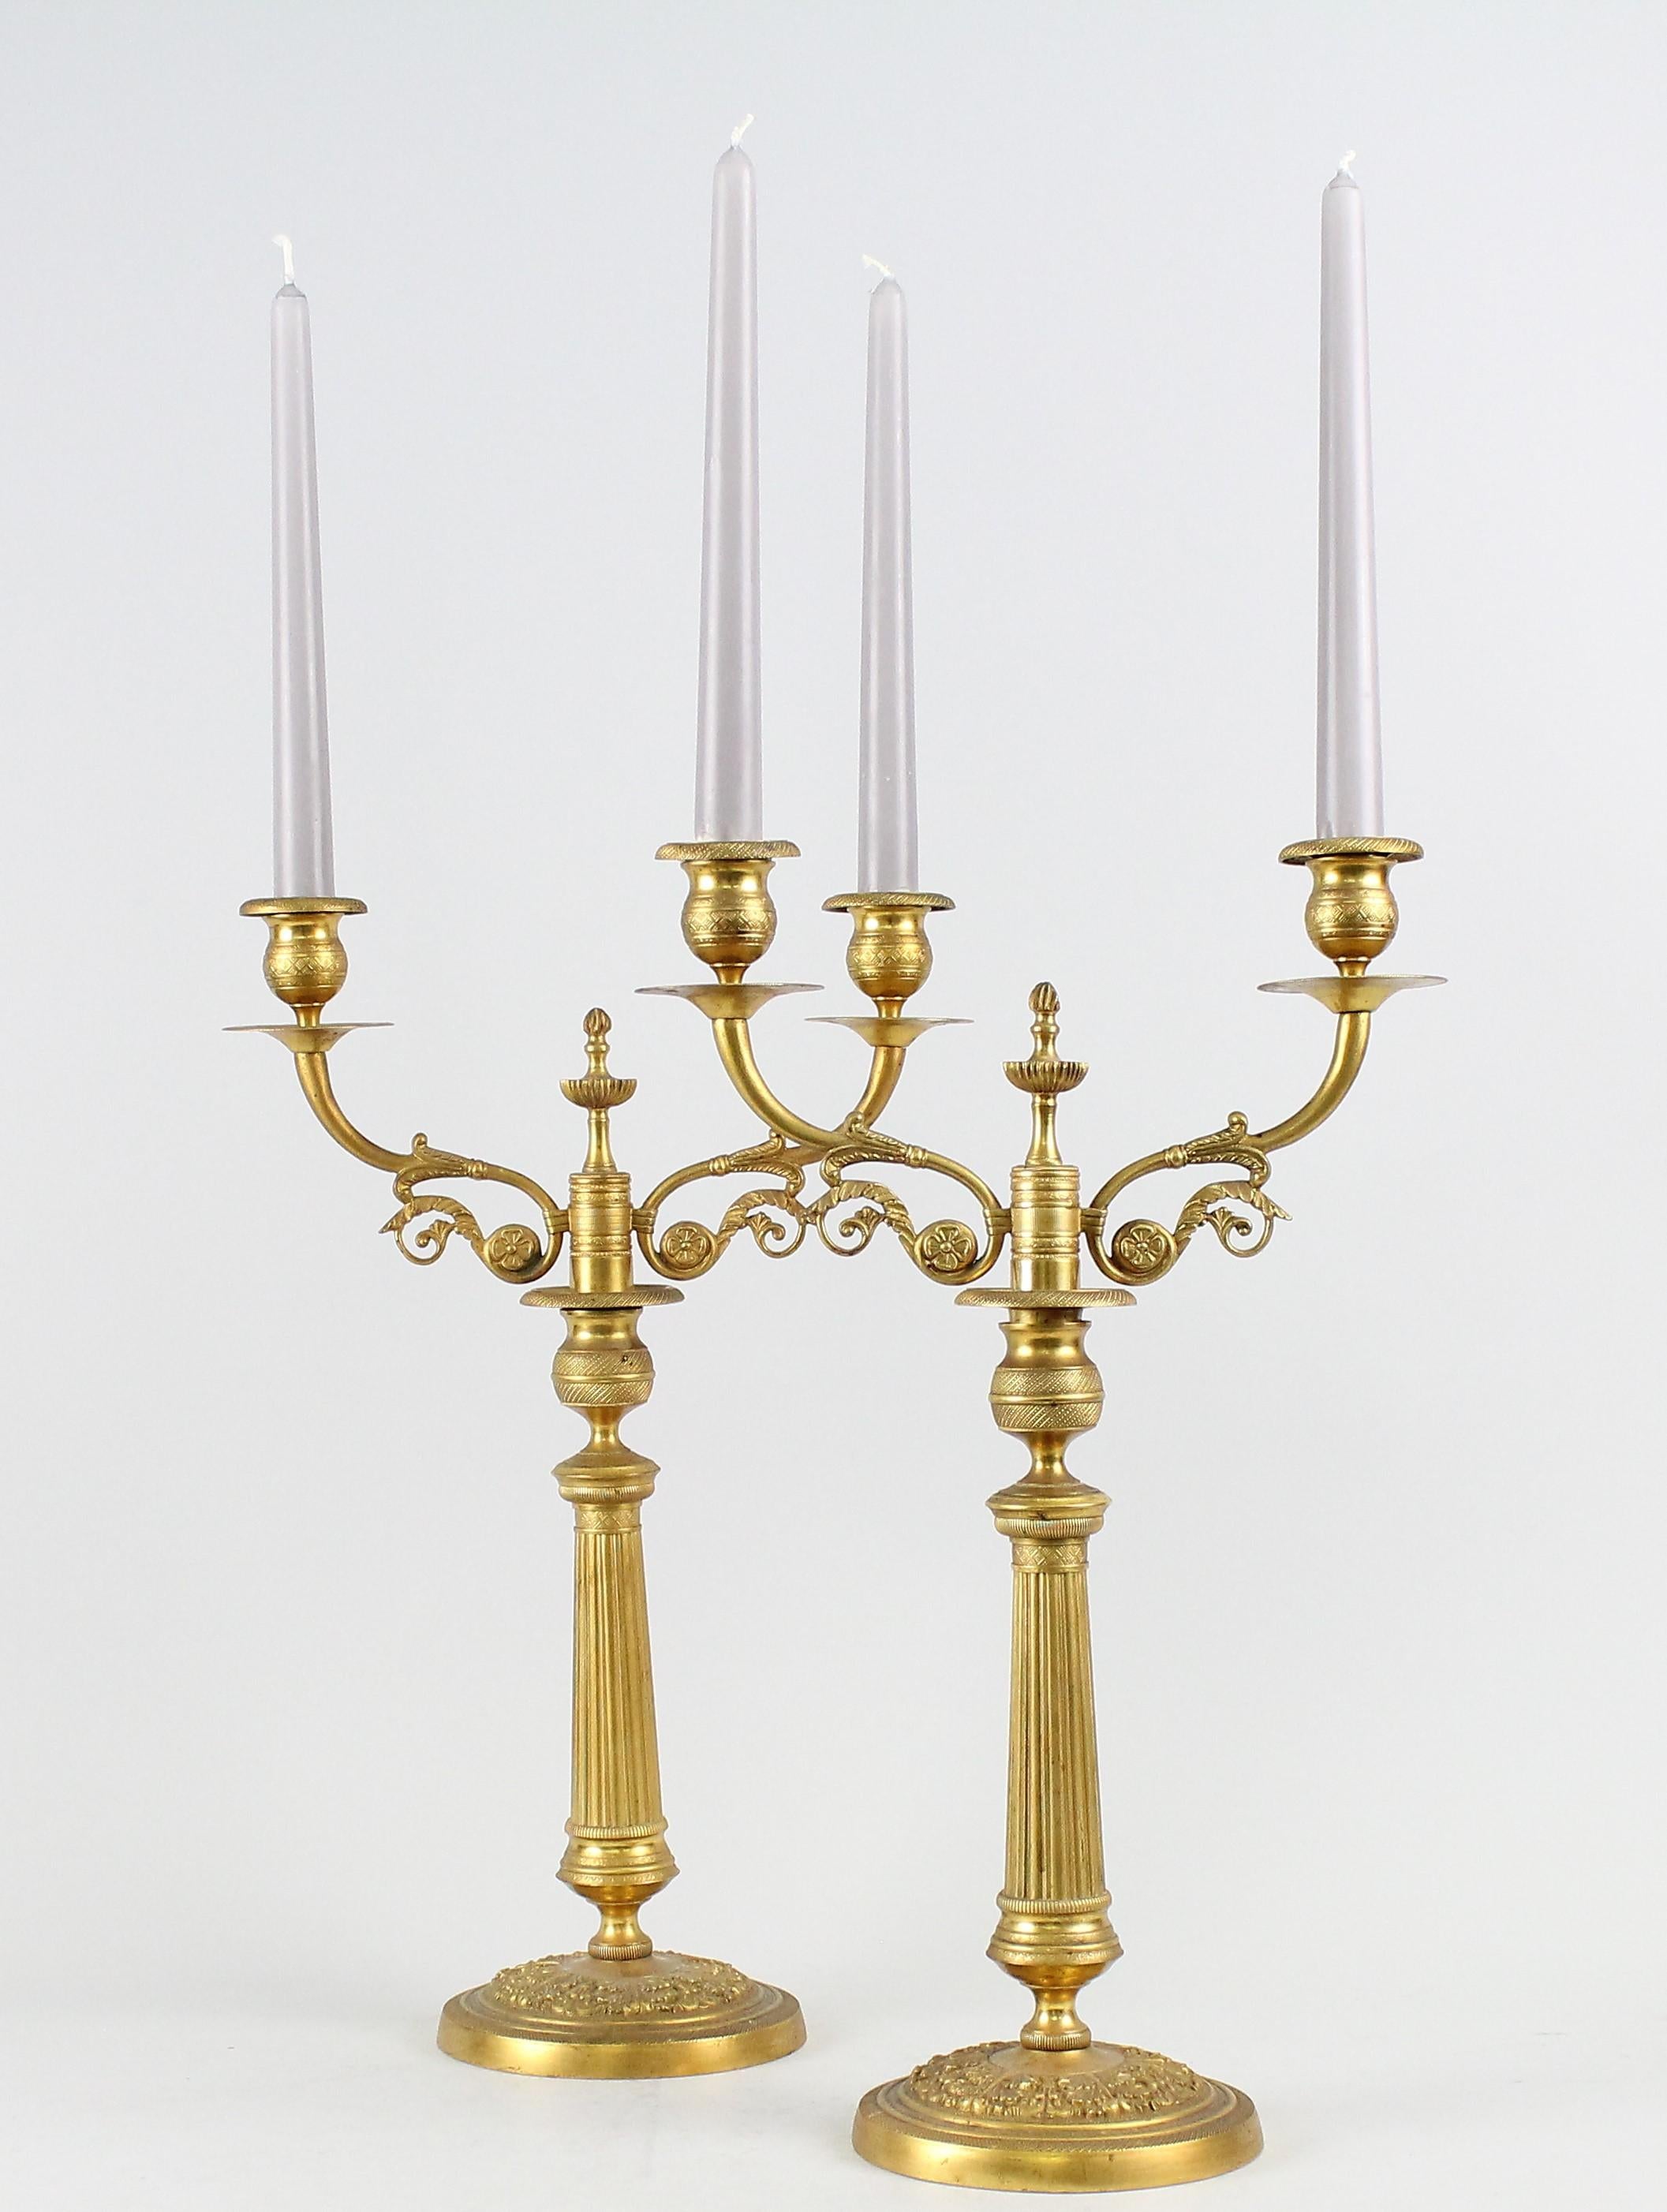 A pair of European Mid-19th Century bronze-gilt candelabras.
For two candles each. Very nice original condition.